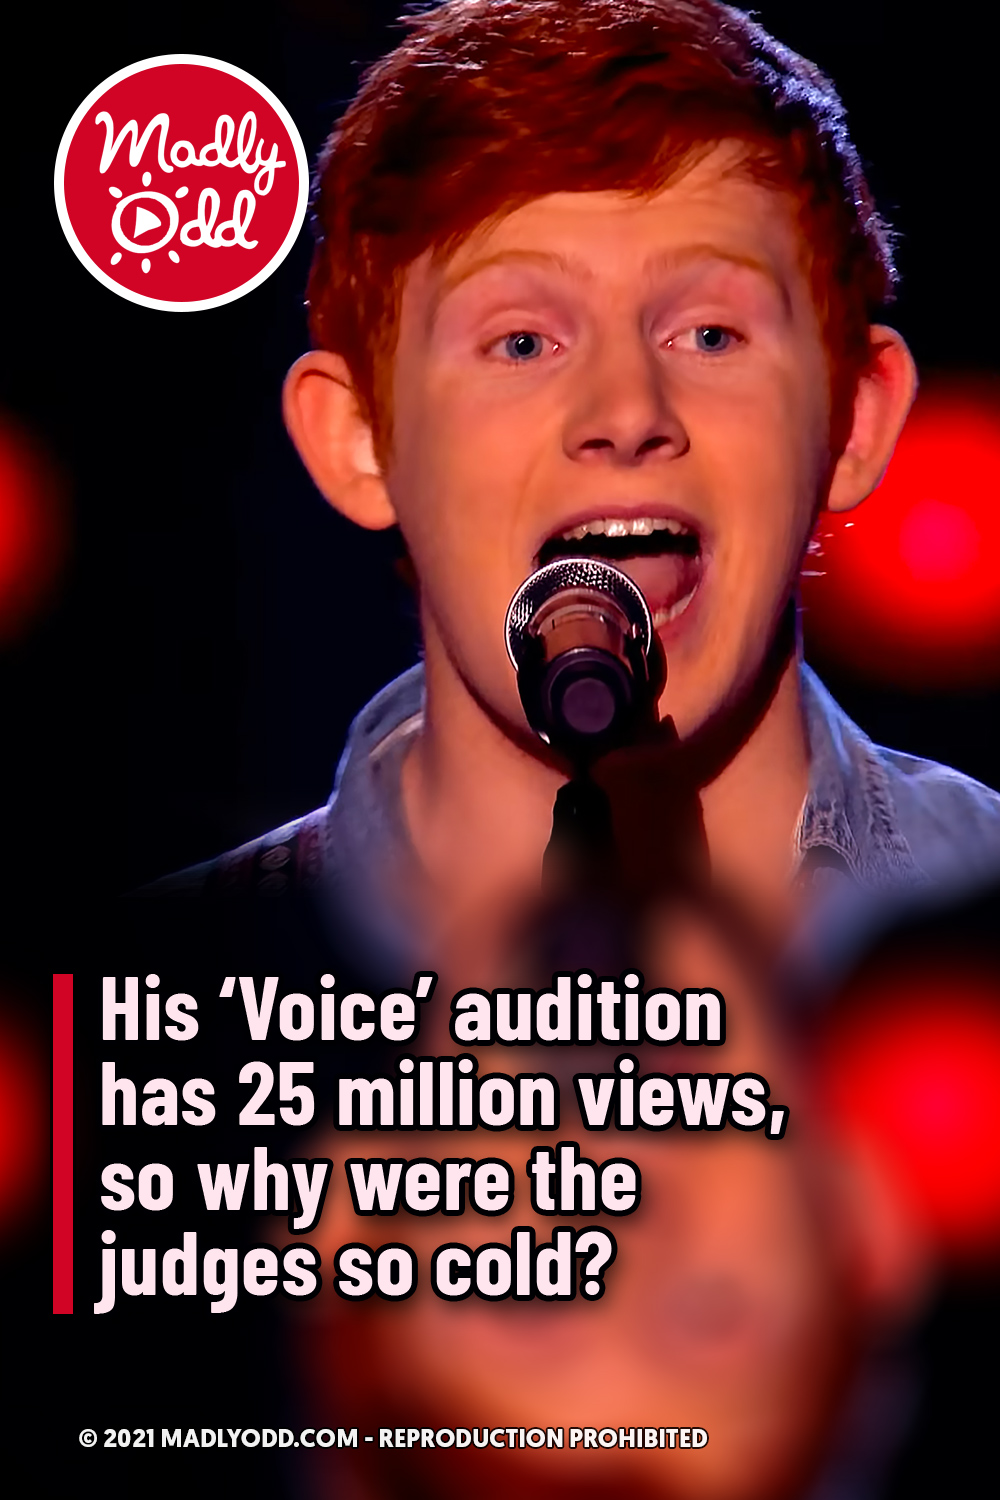 His ‘Voice’ audition has 25 million views, so why were the judges so cold?